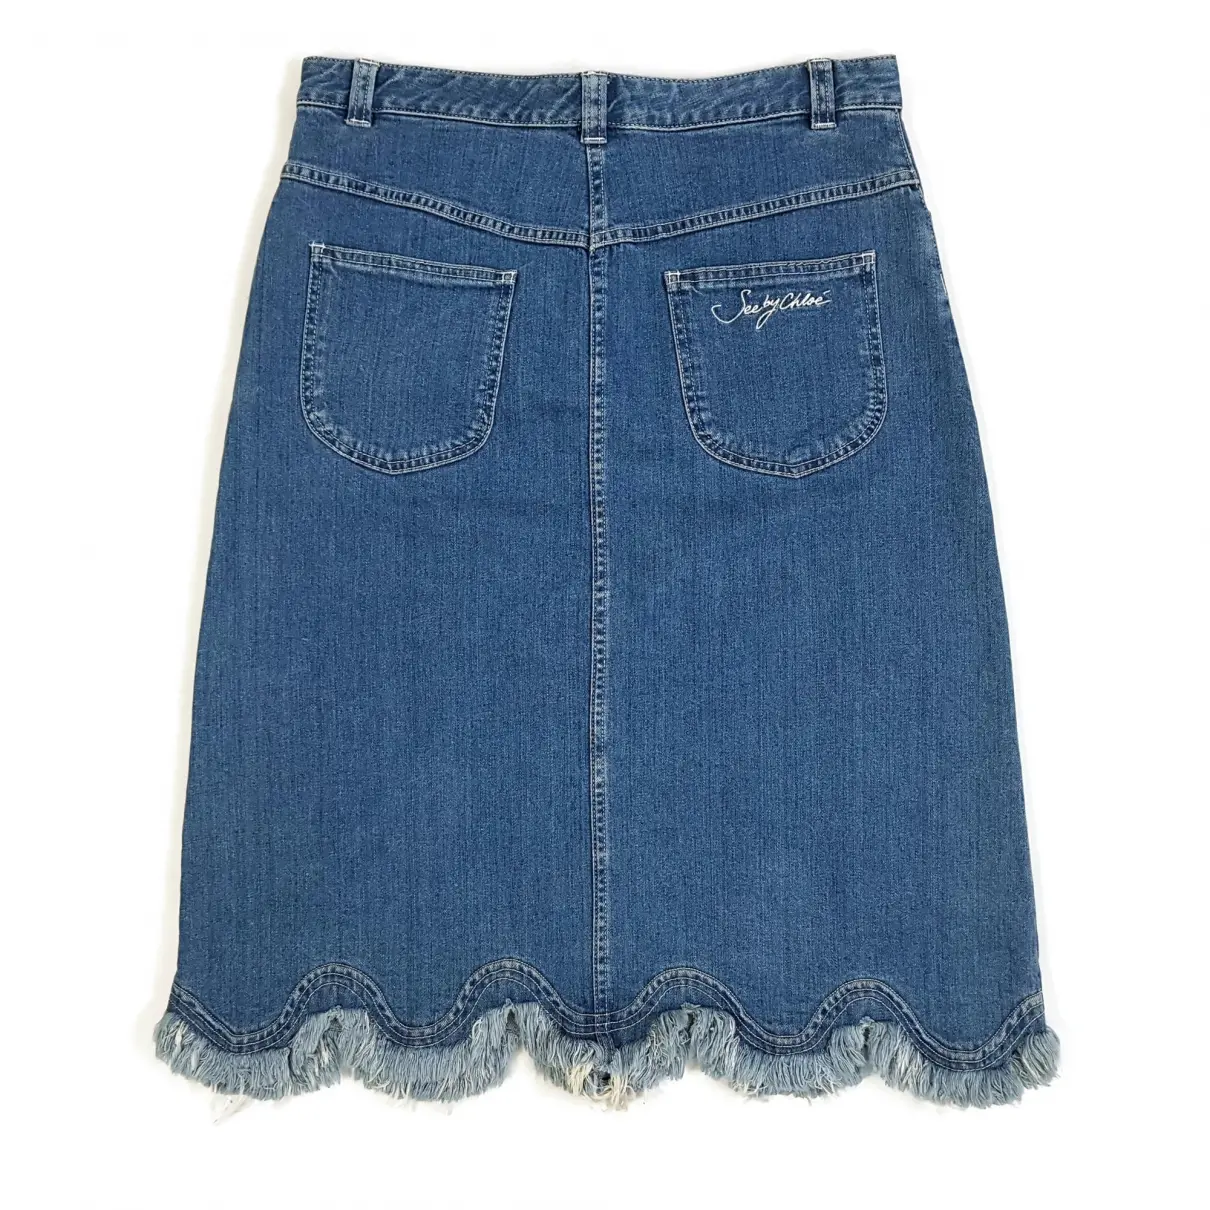 Buy See by Chloé Mid-length skirt online